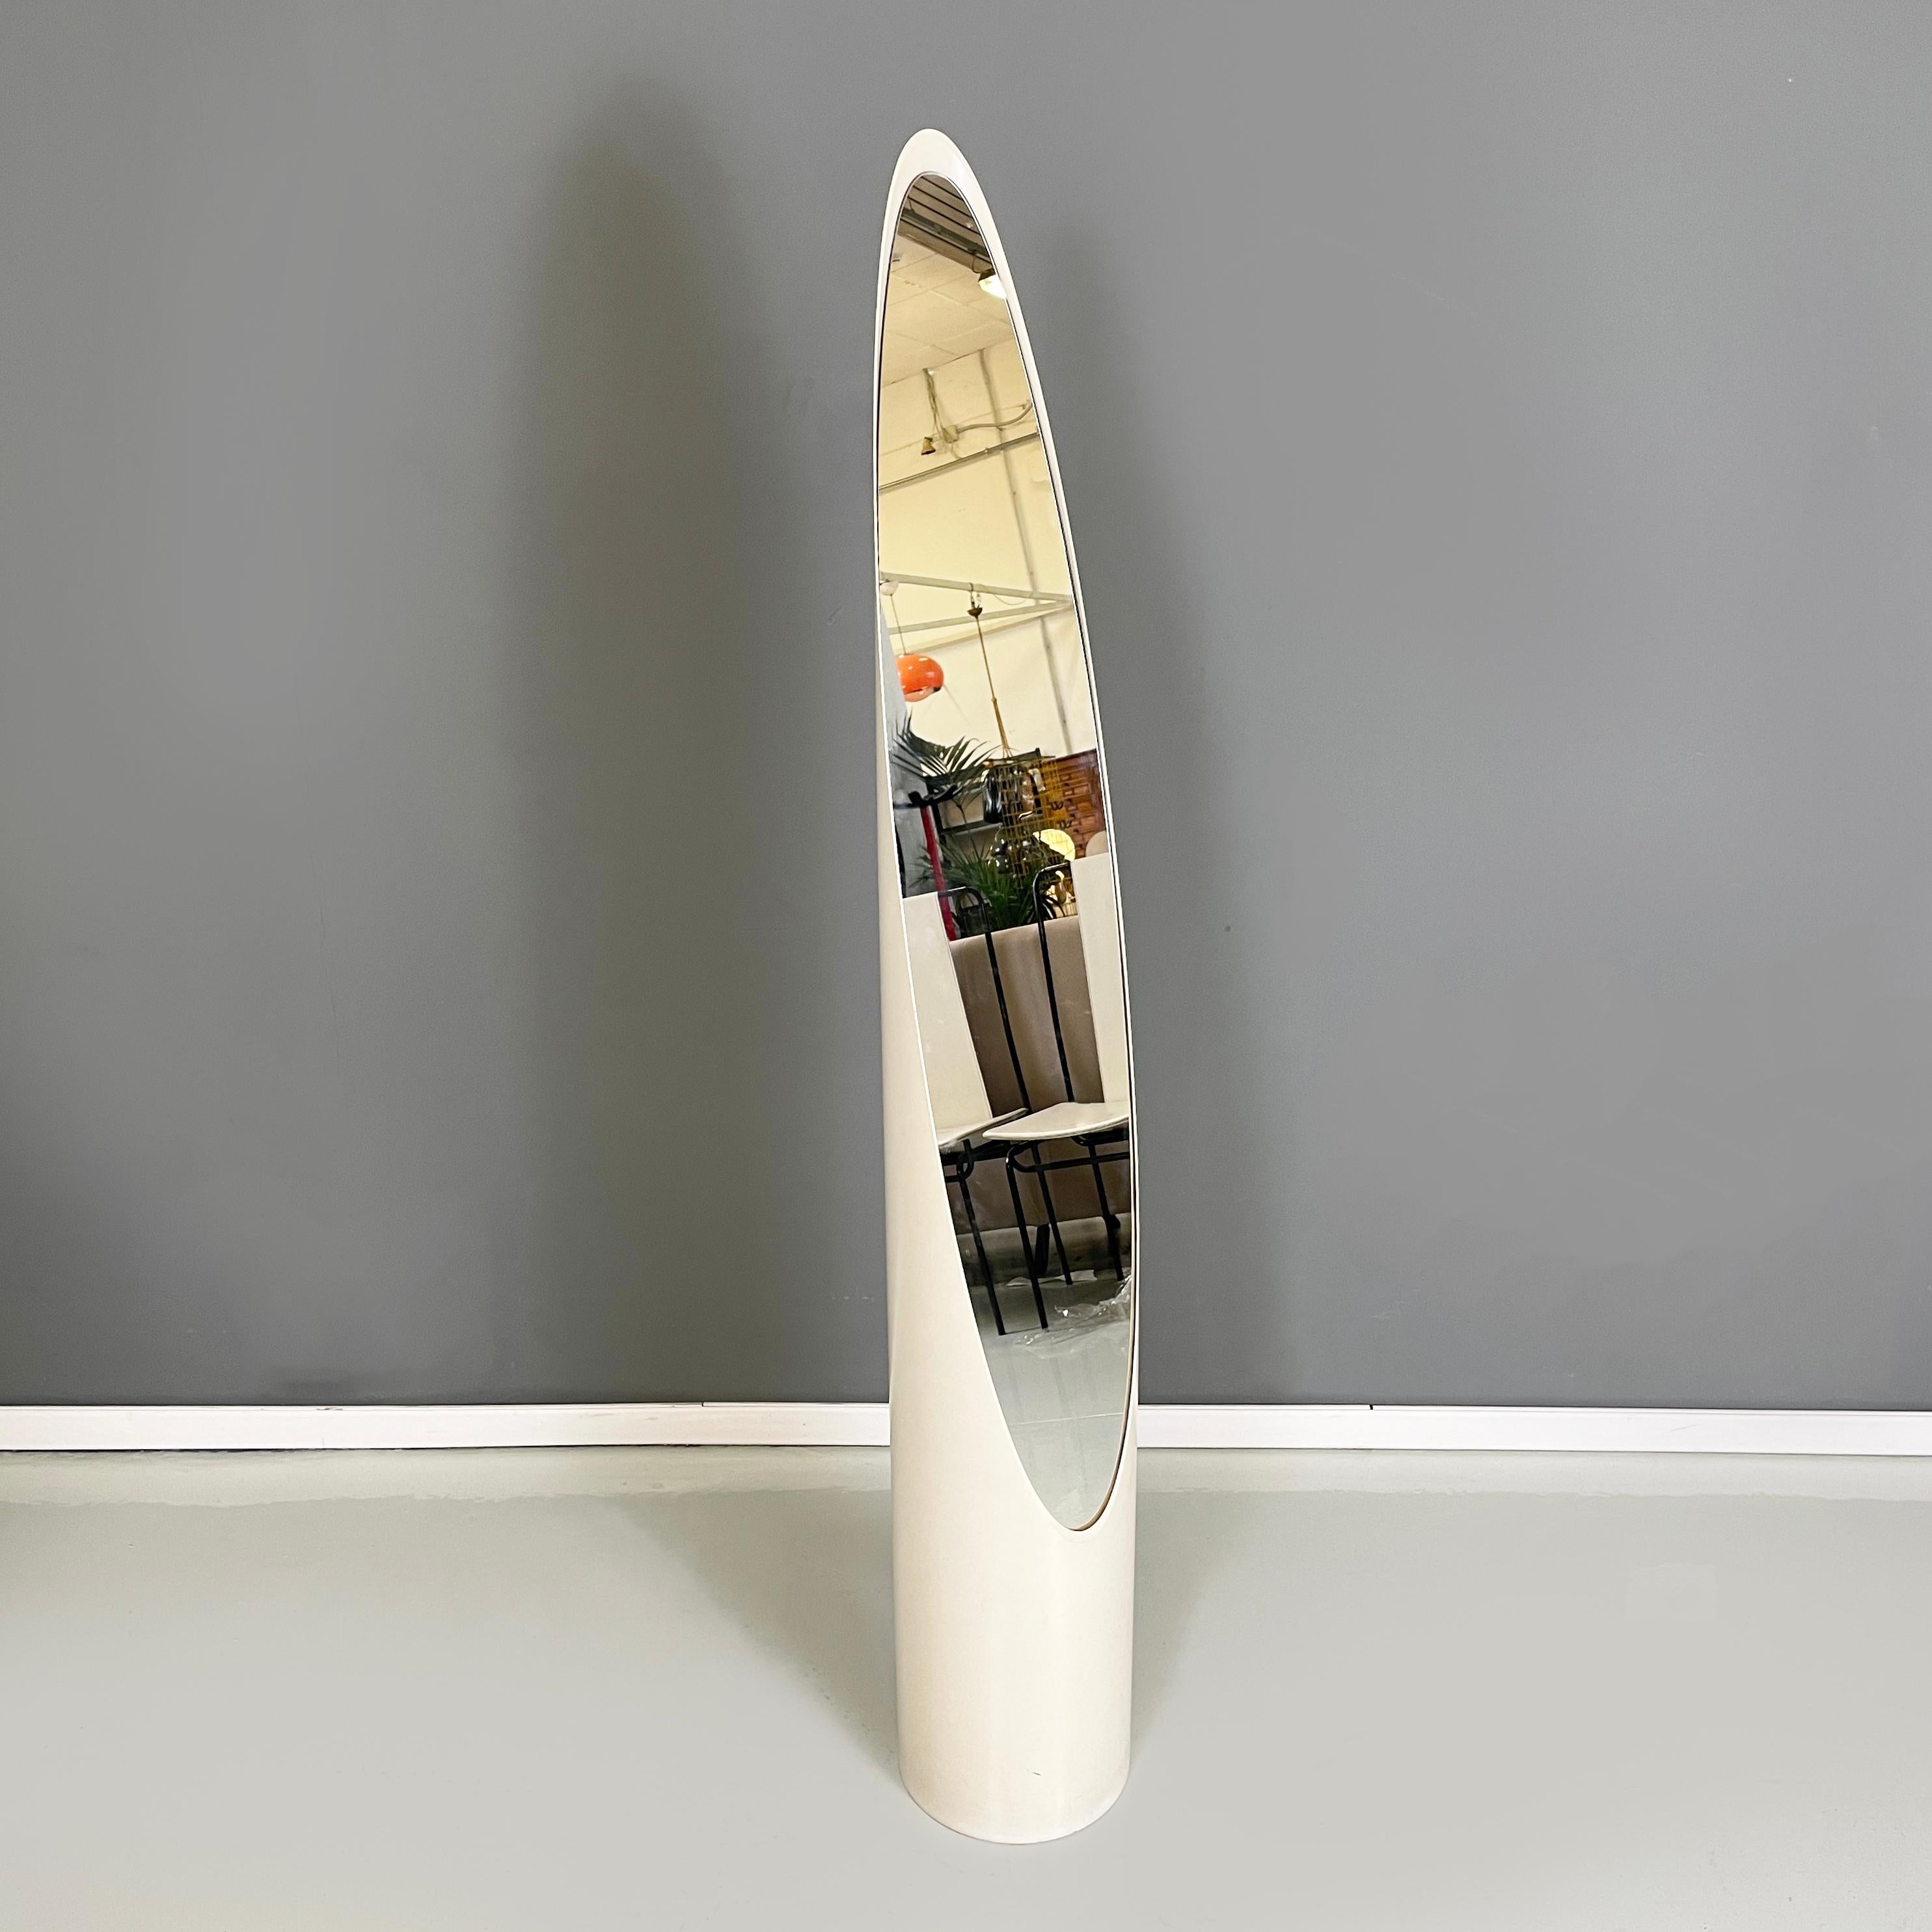 Italian modern White plastic floor mirror Unghia or Lipstick by Rodolfo Bonetto, 1970s
Self-supporting floor mirror mod. Unghia, also known as Lipstick, with a round base and a white ABS plastic structure. The elliptical mirror is slightly inclined